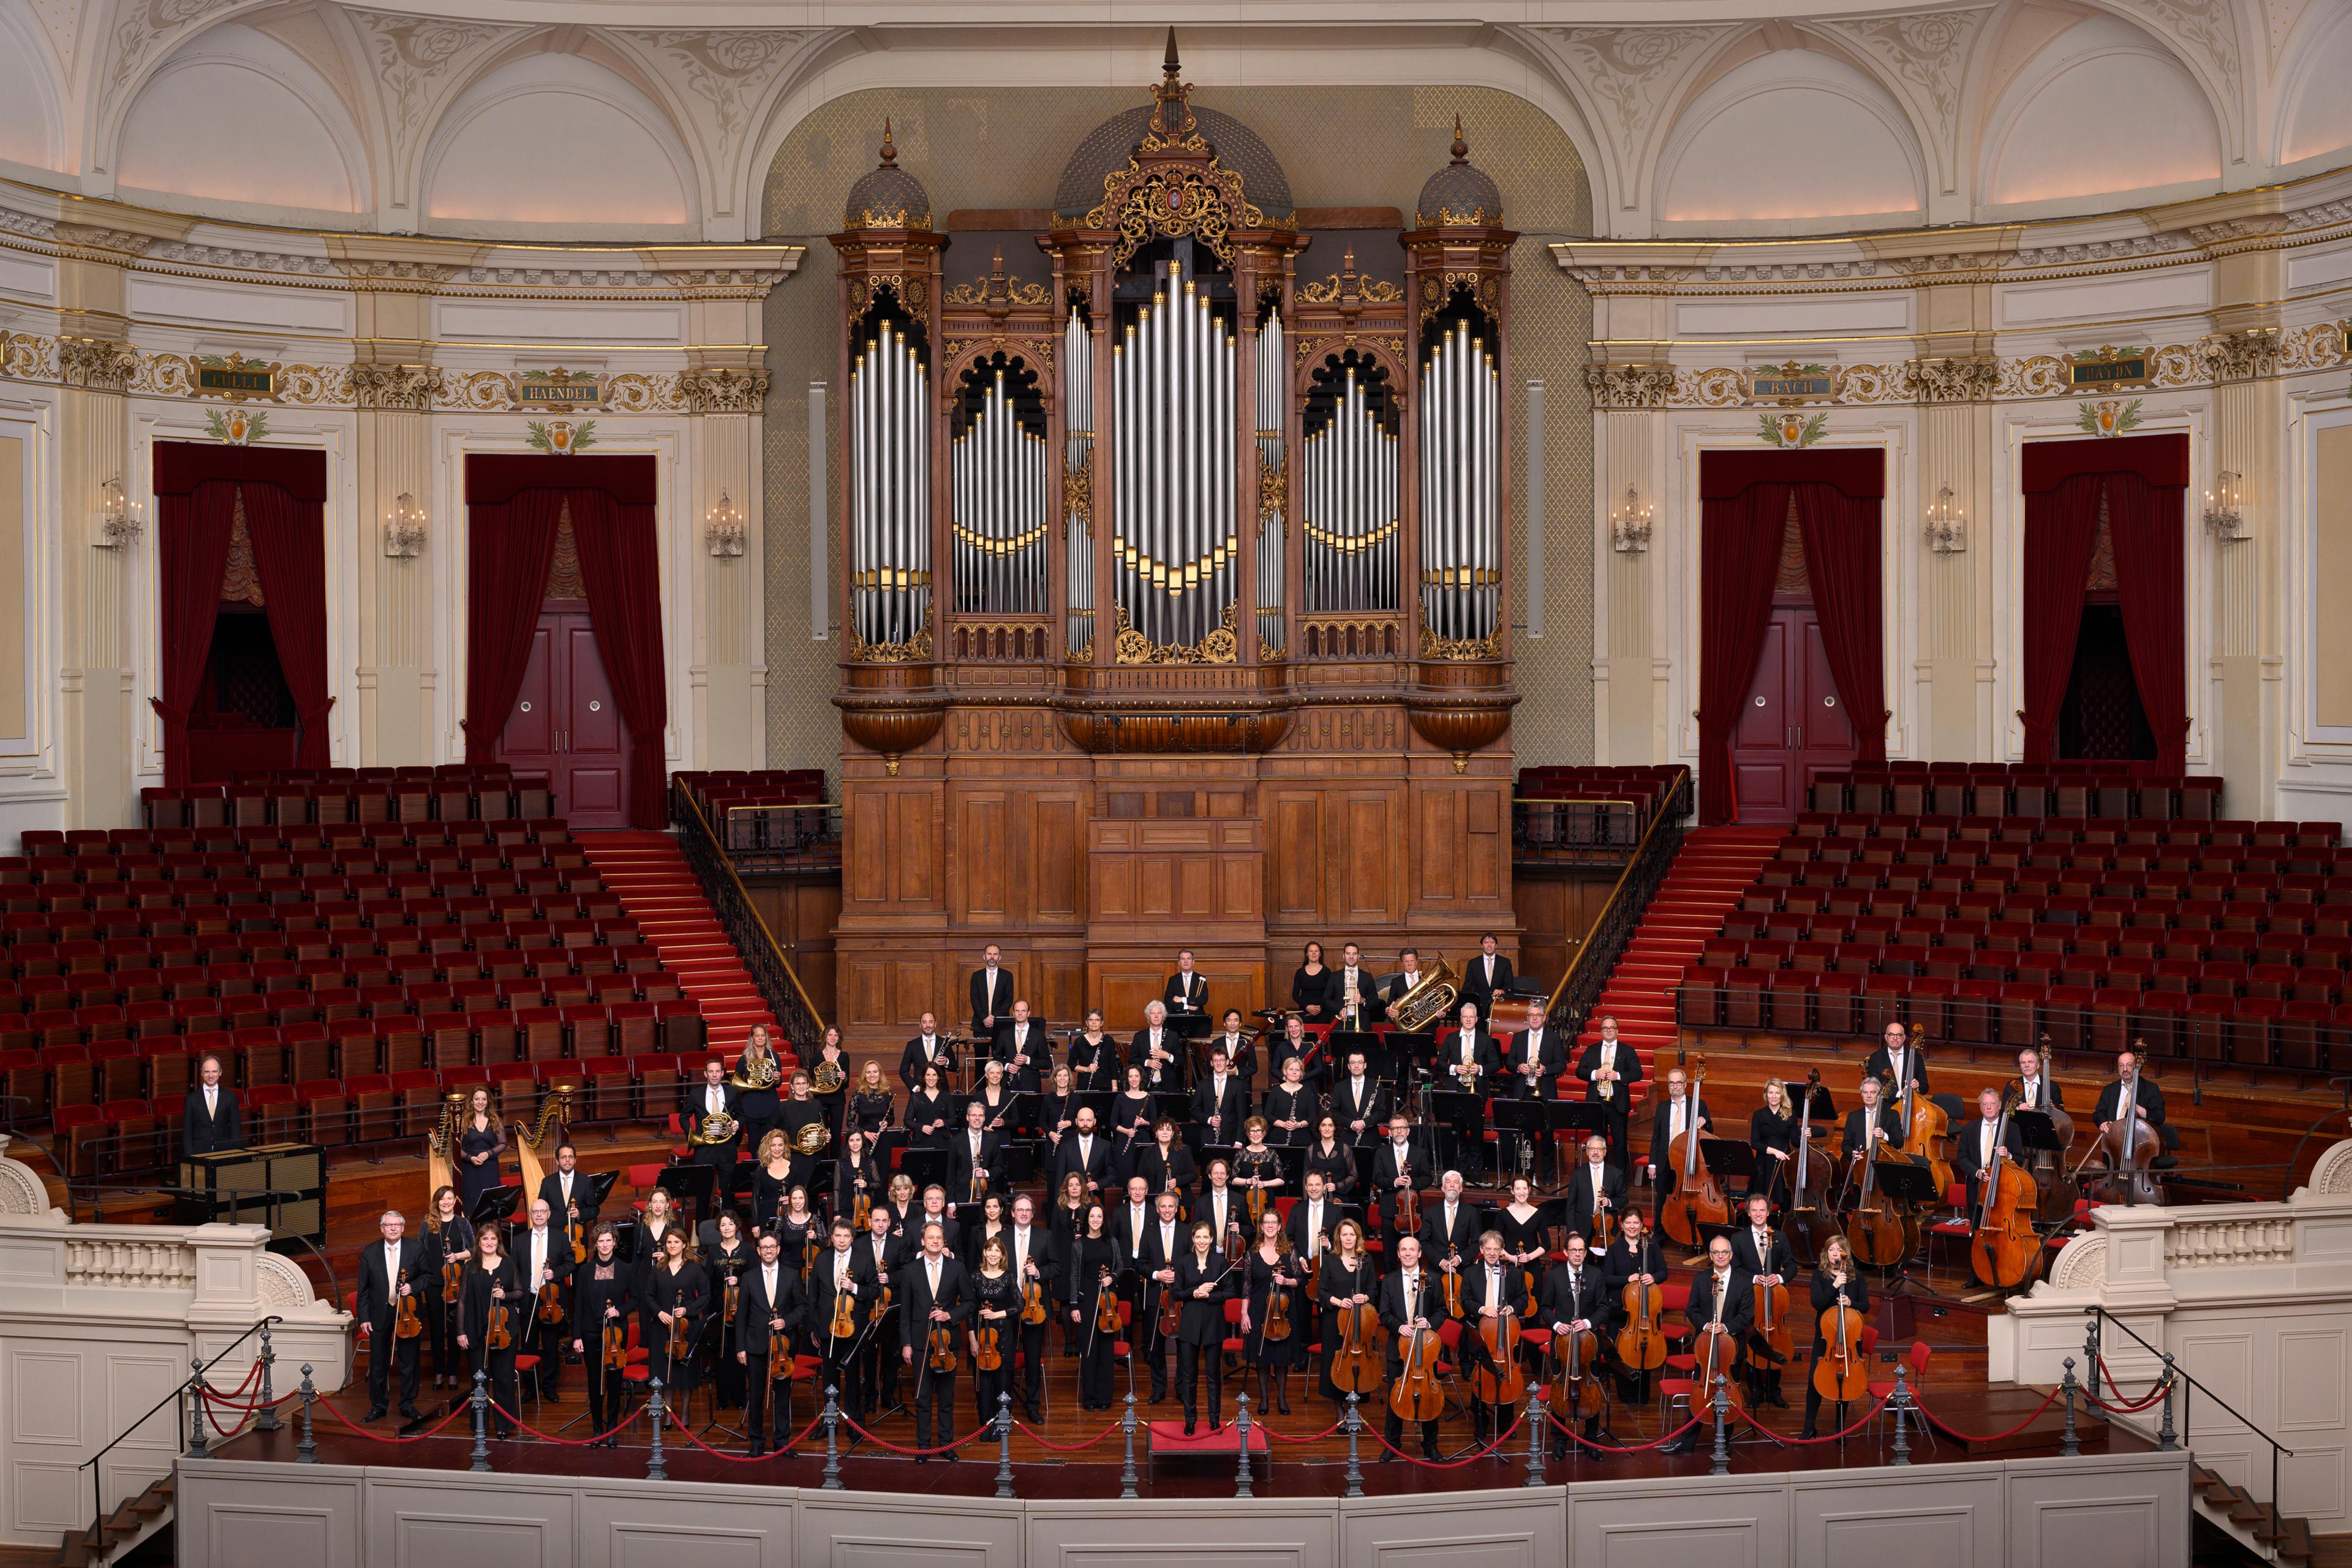 The orchestra stood on stage in front of a grand organ looking at the camera